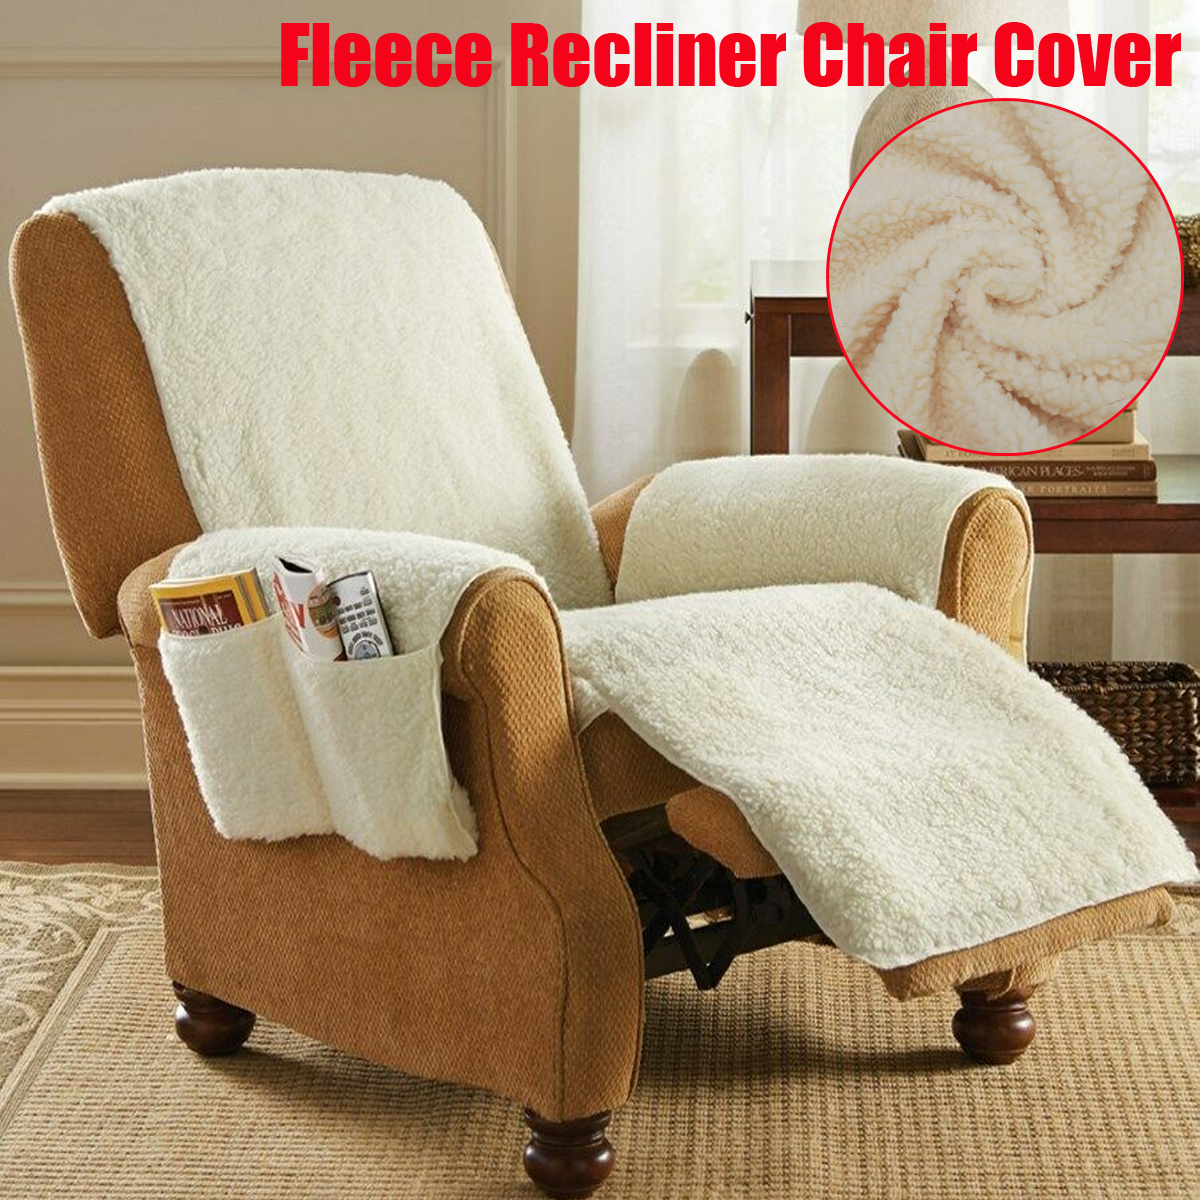 Chair-Seat-Sofa-Couch-Fleece-Recliner-Cover-Slipcover-Pets-Mat-Furniture-1827423-2